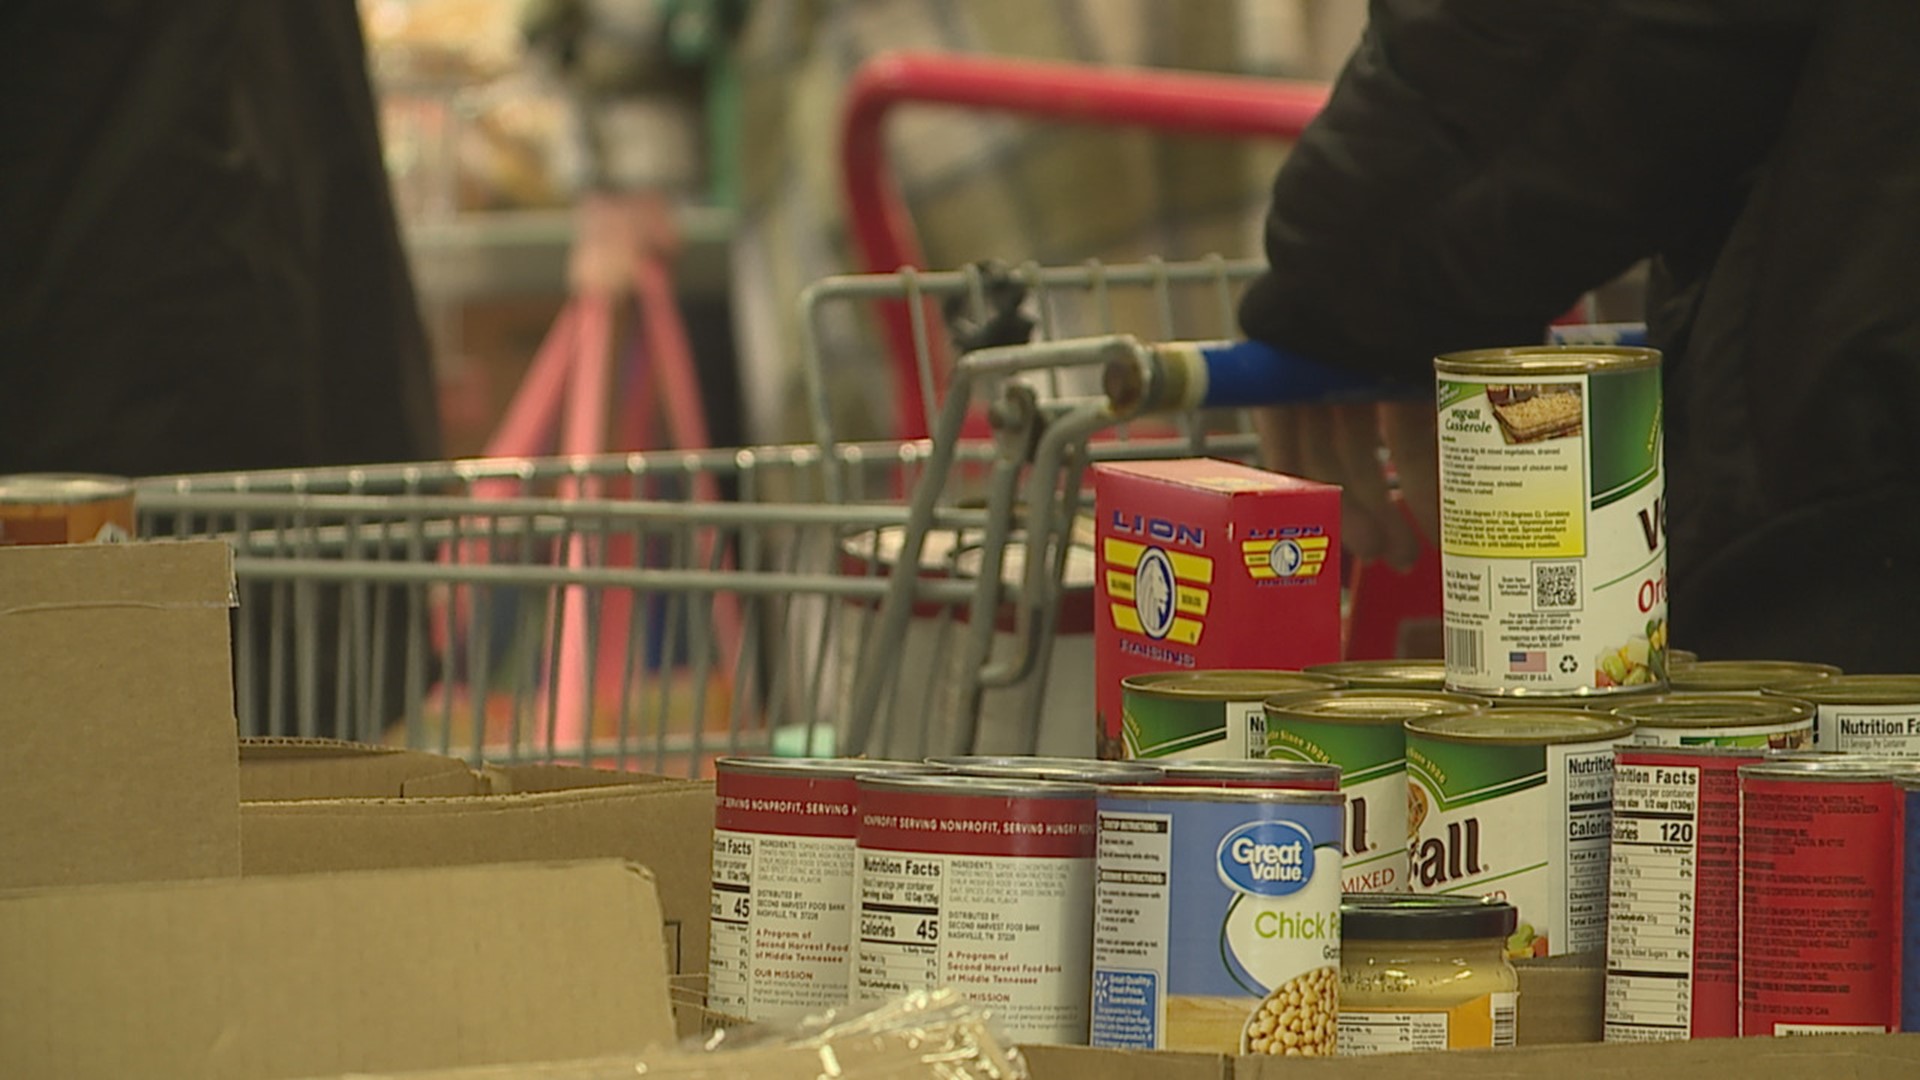 Some food banks and pantries are still reeling from last week’s snowy weather, which resulted in some families not receiving weekly or monthly groceries.